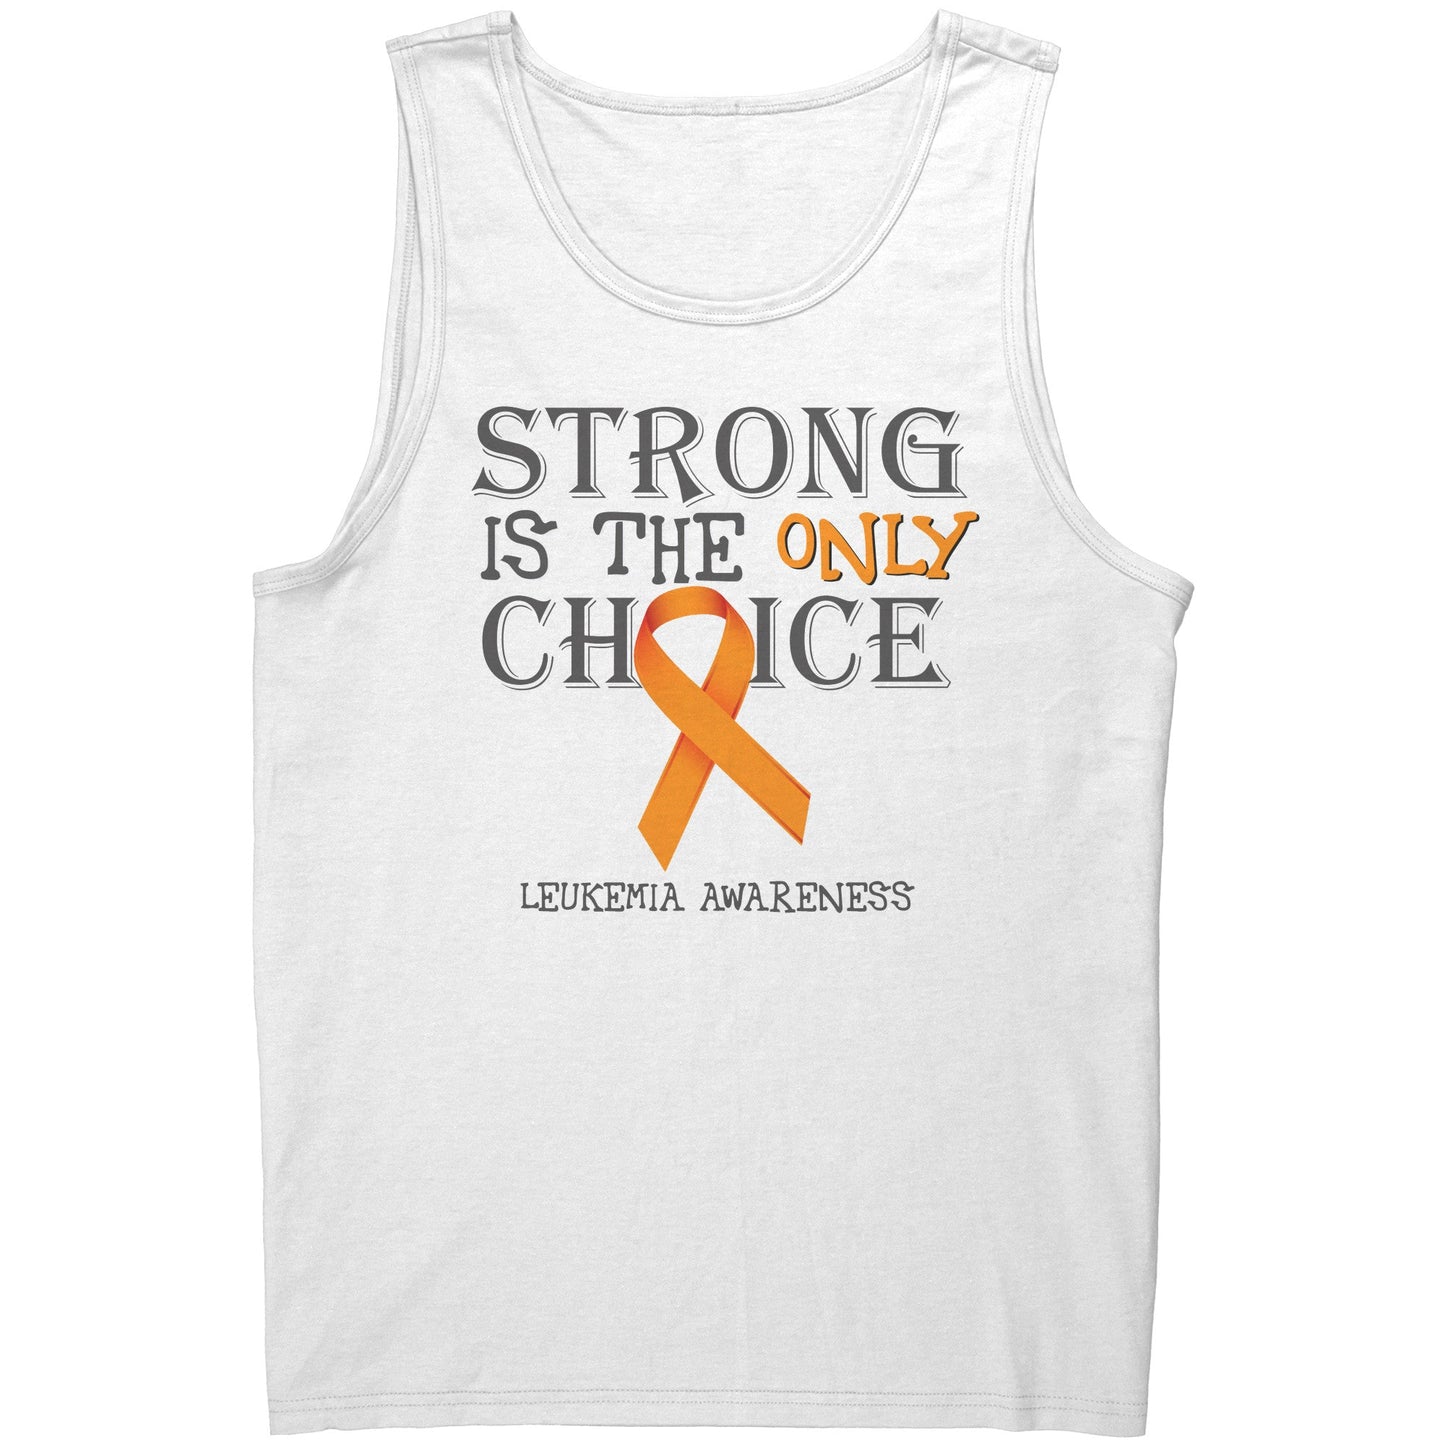 Strong is the Only Choice -Leukemia Awareness T-Shirt, Hoodie, Tank |x|